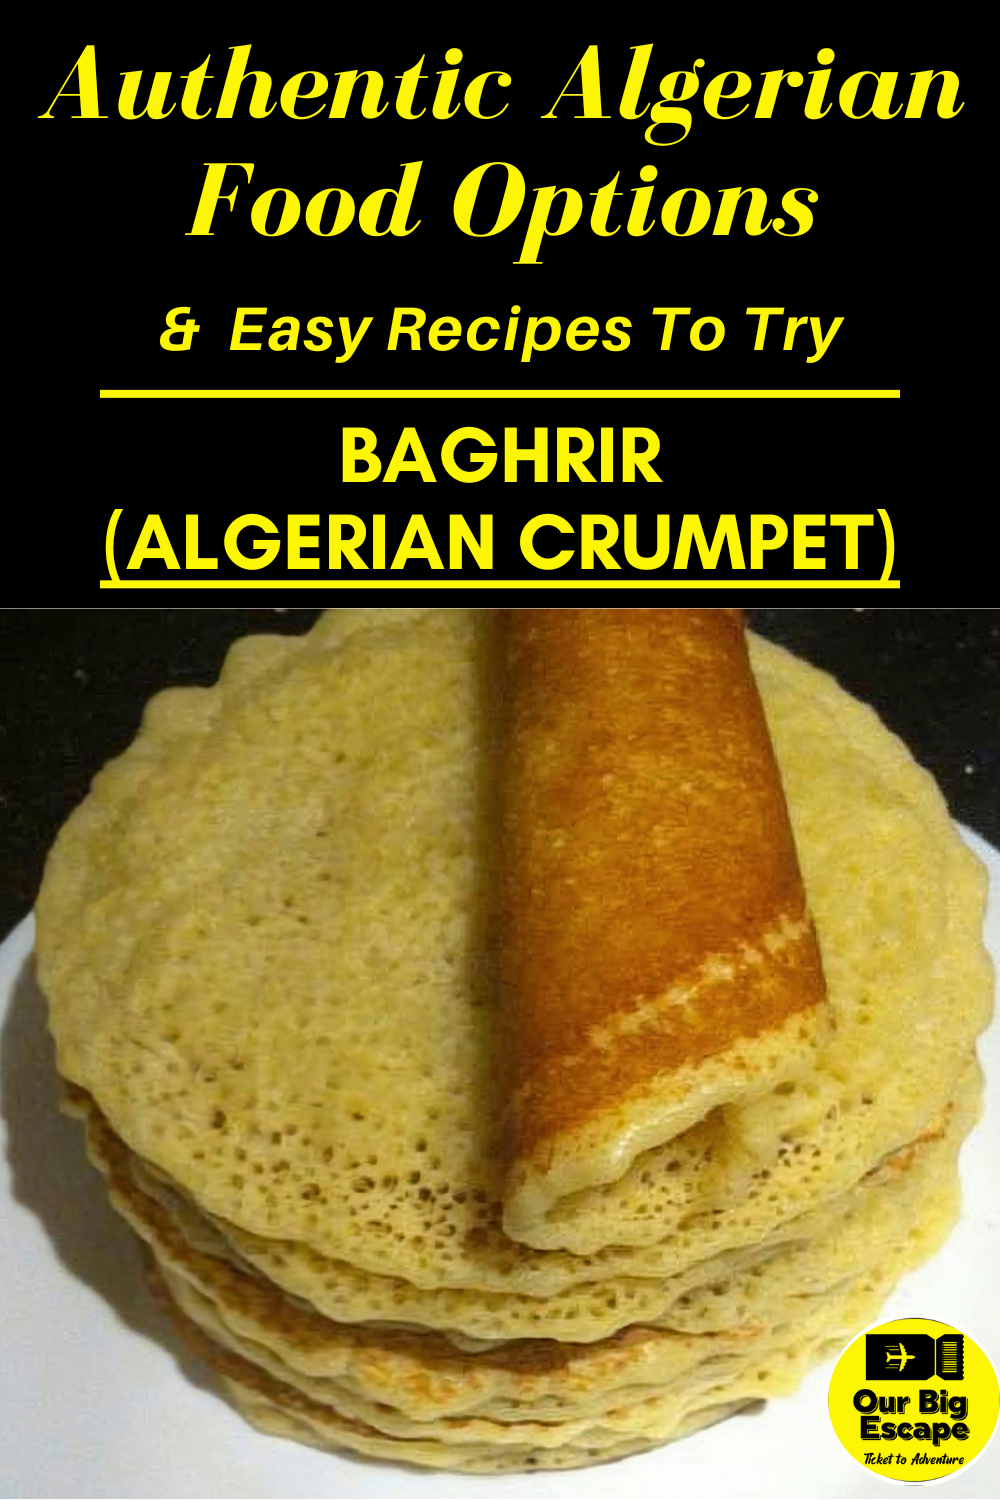 0 Baghrir (Algerian Traditional Crumpet) - 20 Authentic Algerian Food Options & Easy Recipes To Try